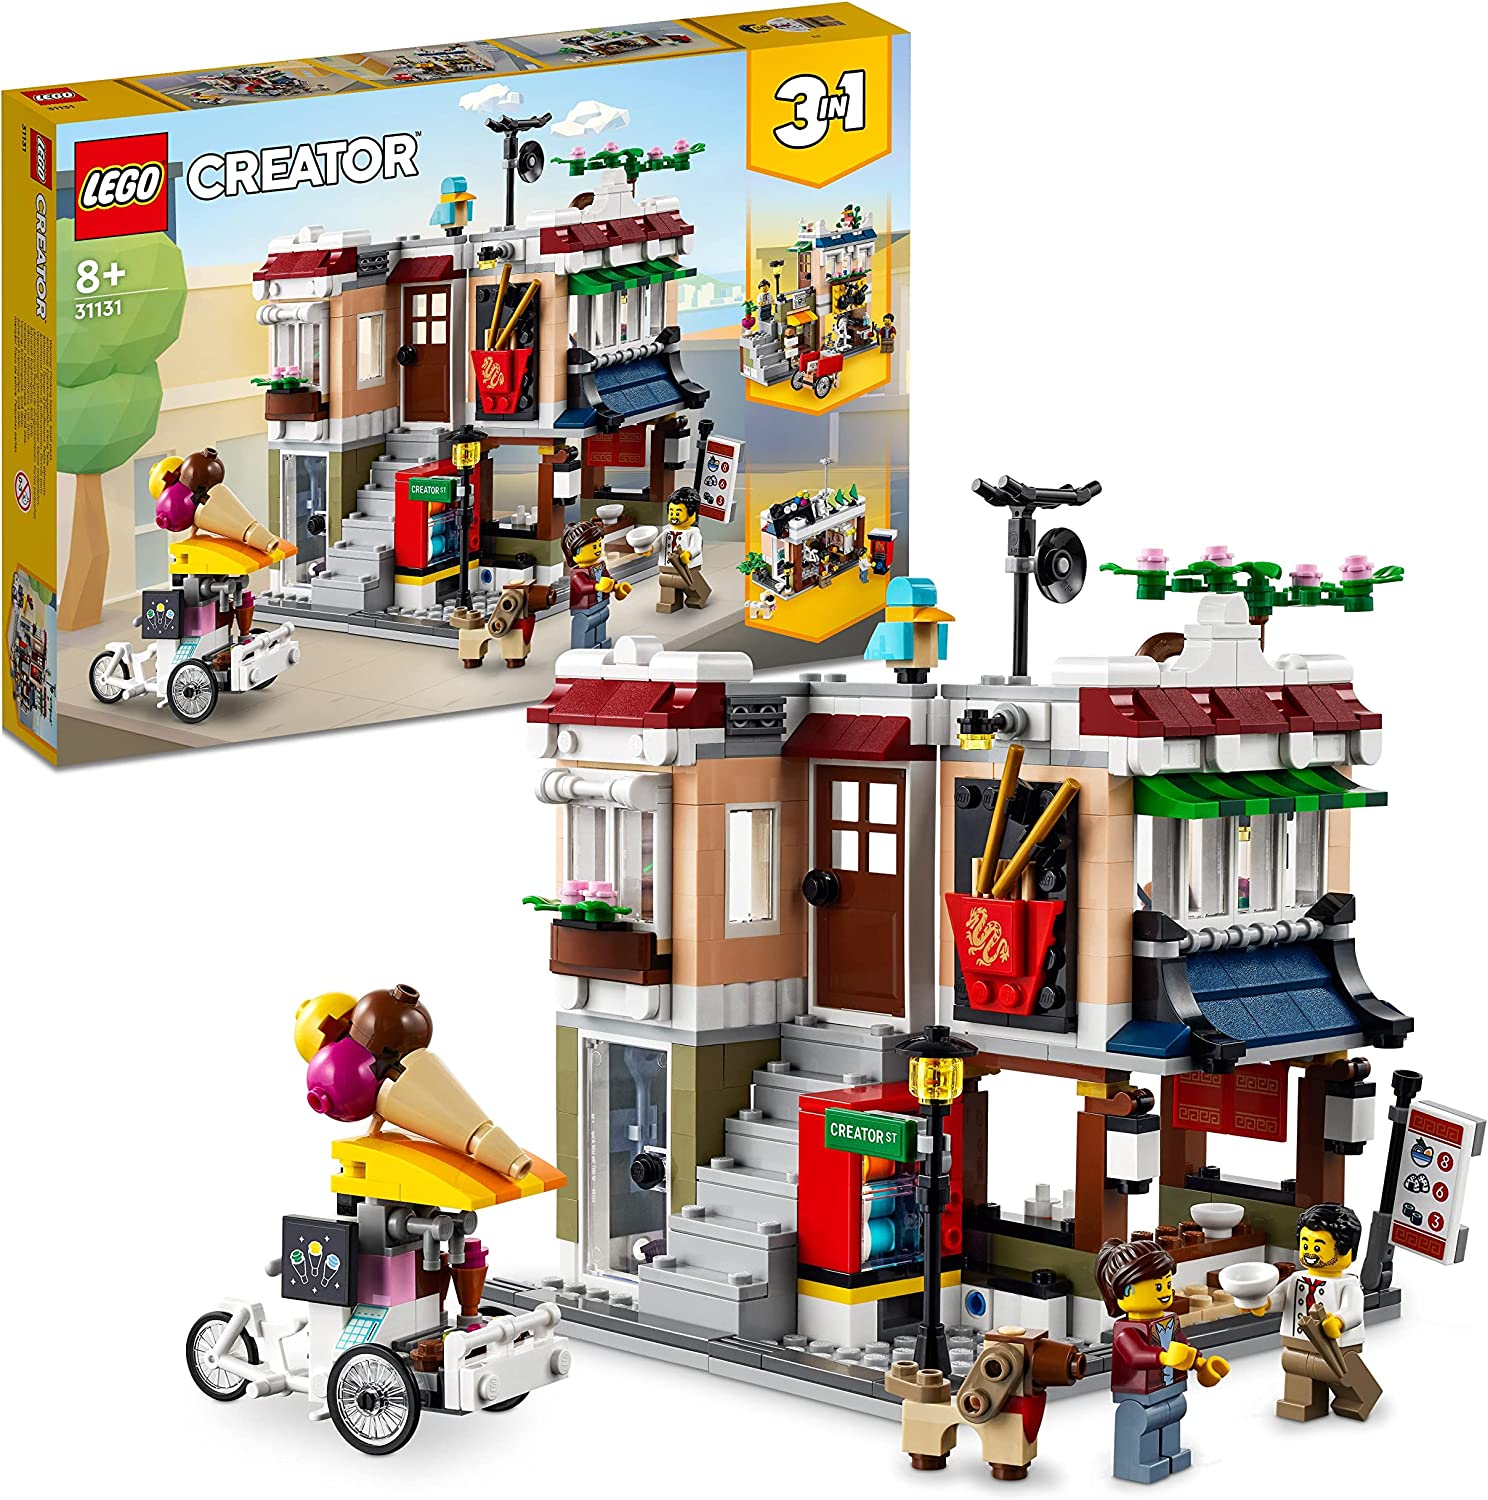 LEGO 31131 Creator Pasta Shop, Bicycle Shop and Play Hall, 3-in-1 Construction Toy for Children from 8 Years, Modular Building